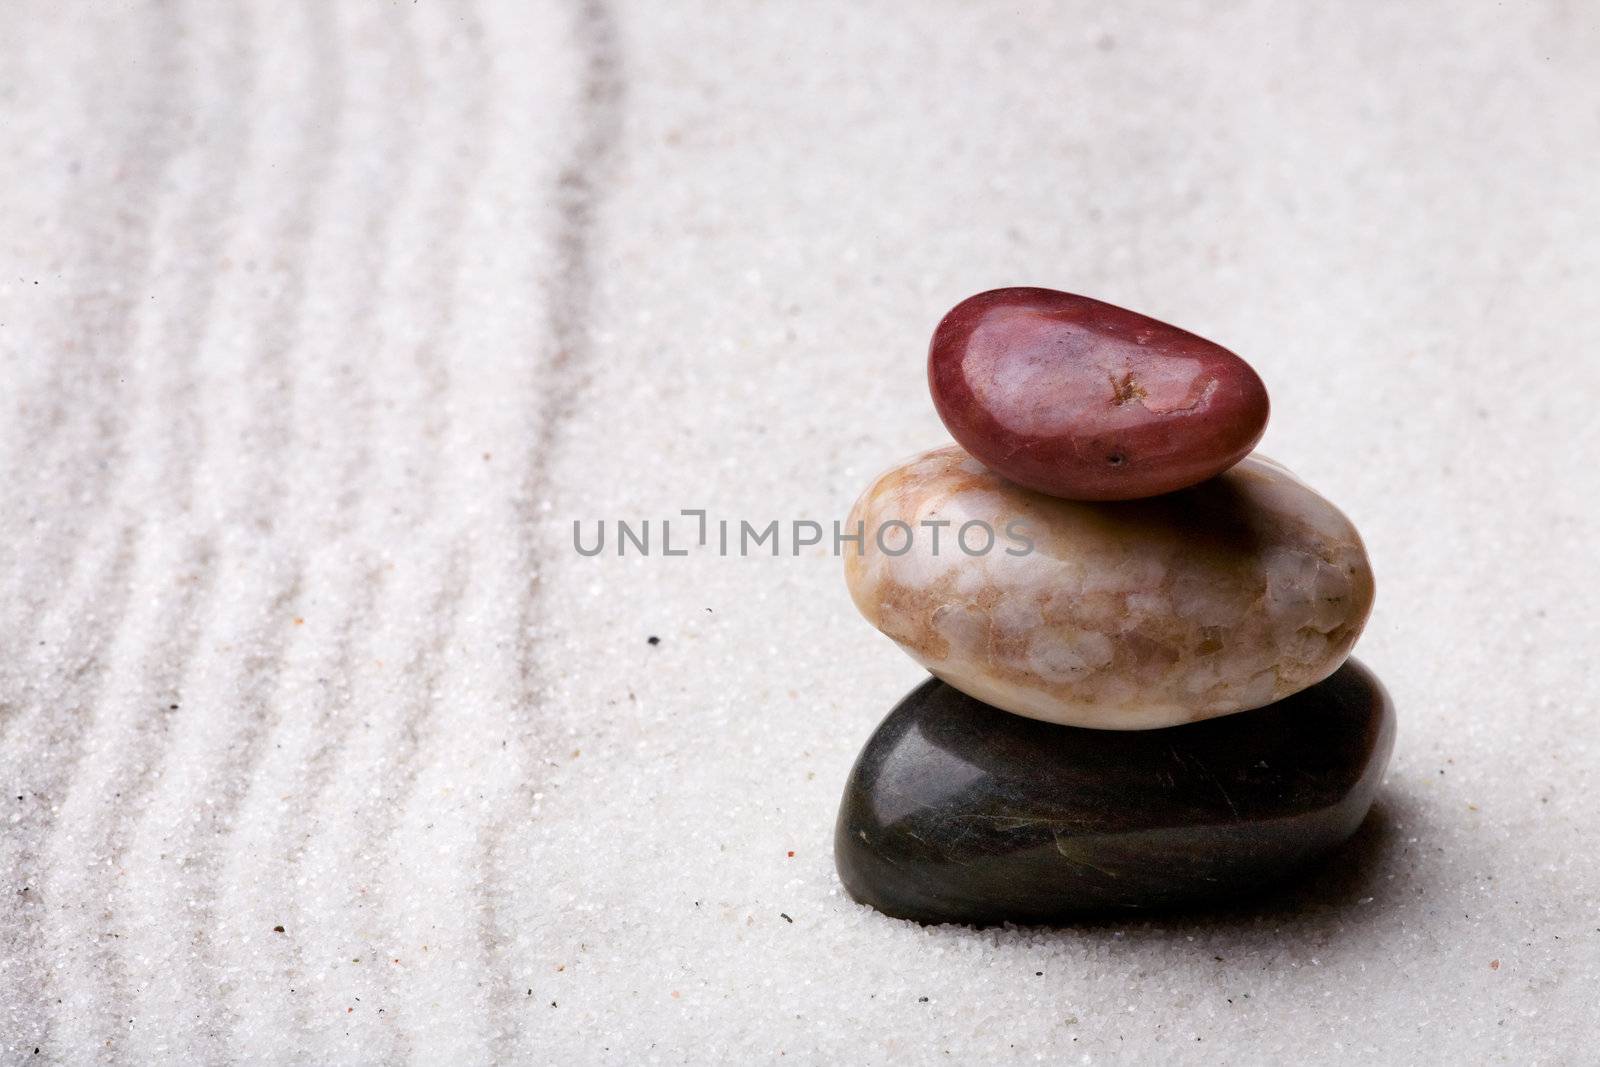 A stack of rocks in a zen rock garden with sand